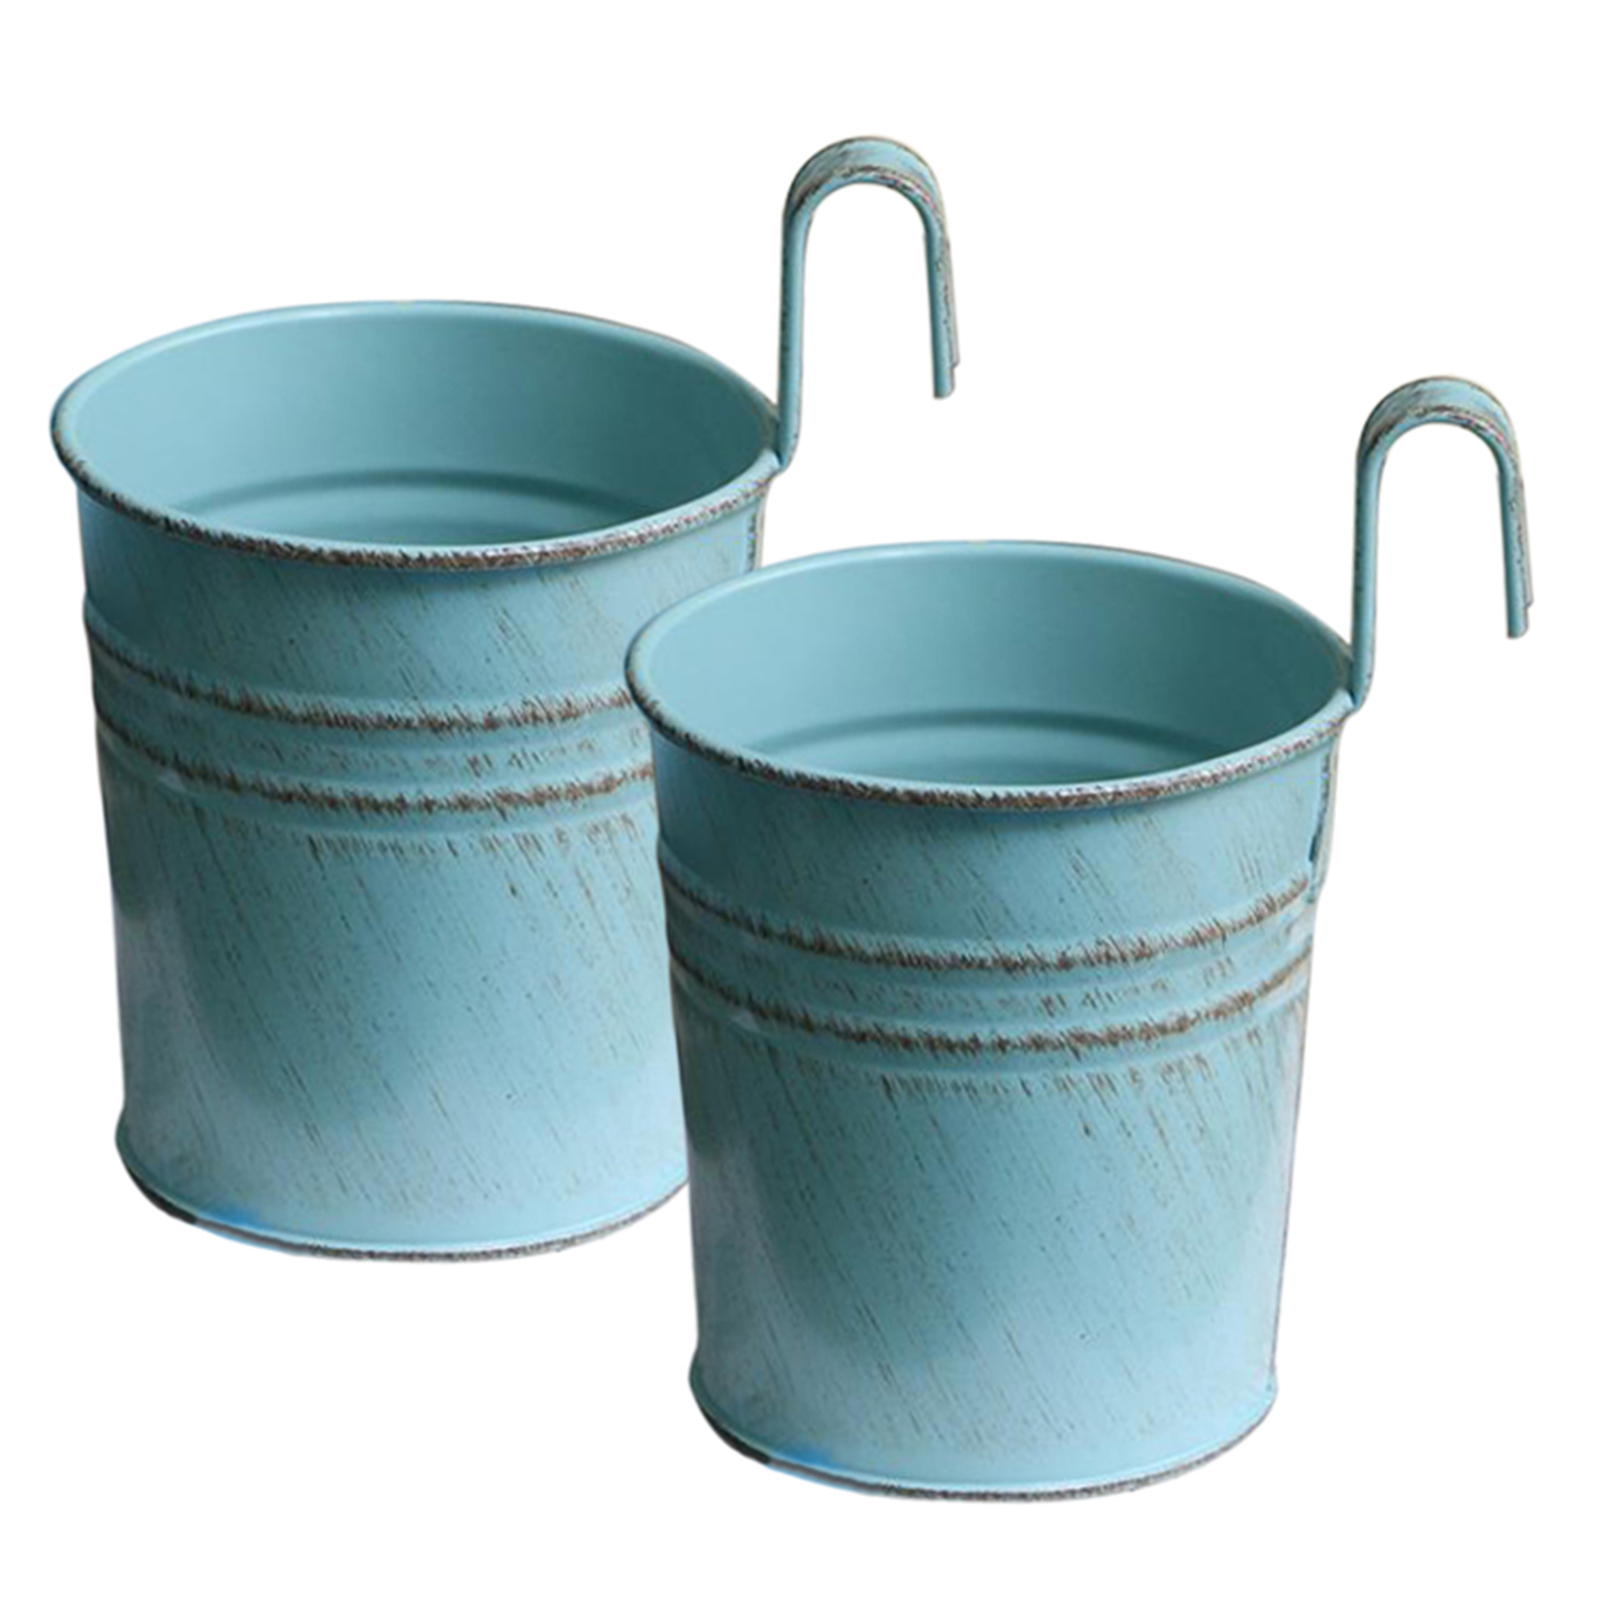 CreativeArrowy Plant Pot Flower Stand Durable 2Pcs Metal Uv Protection Ceramic Planters Detachable Colorful Lightweight Bucket Planter - image 2 of 14